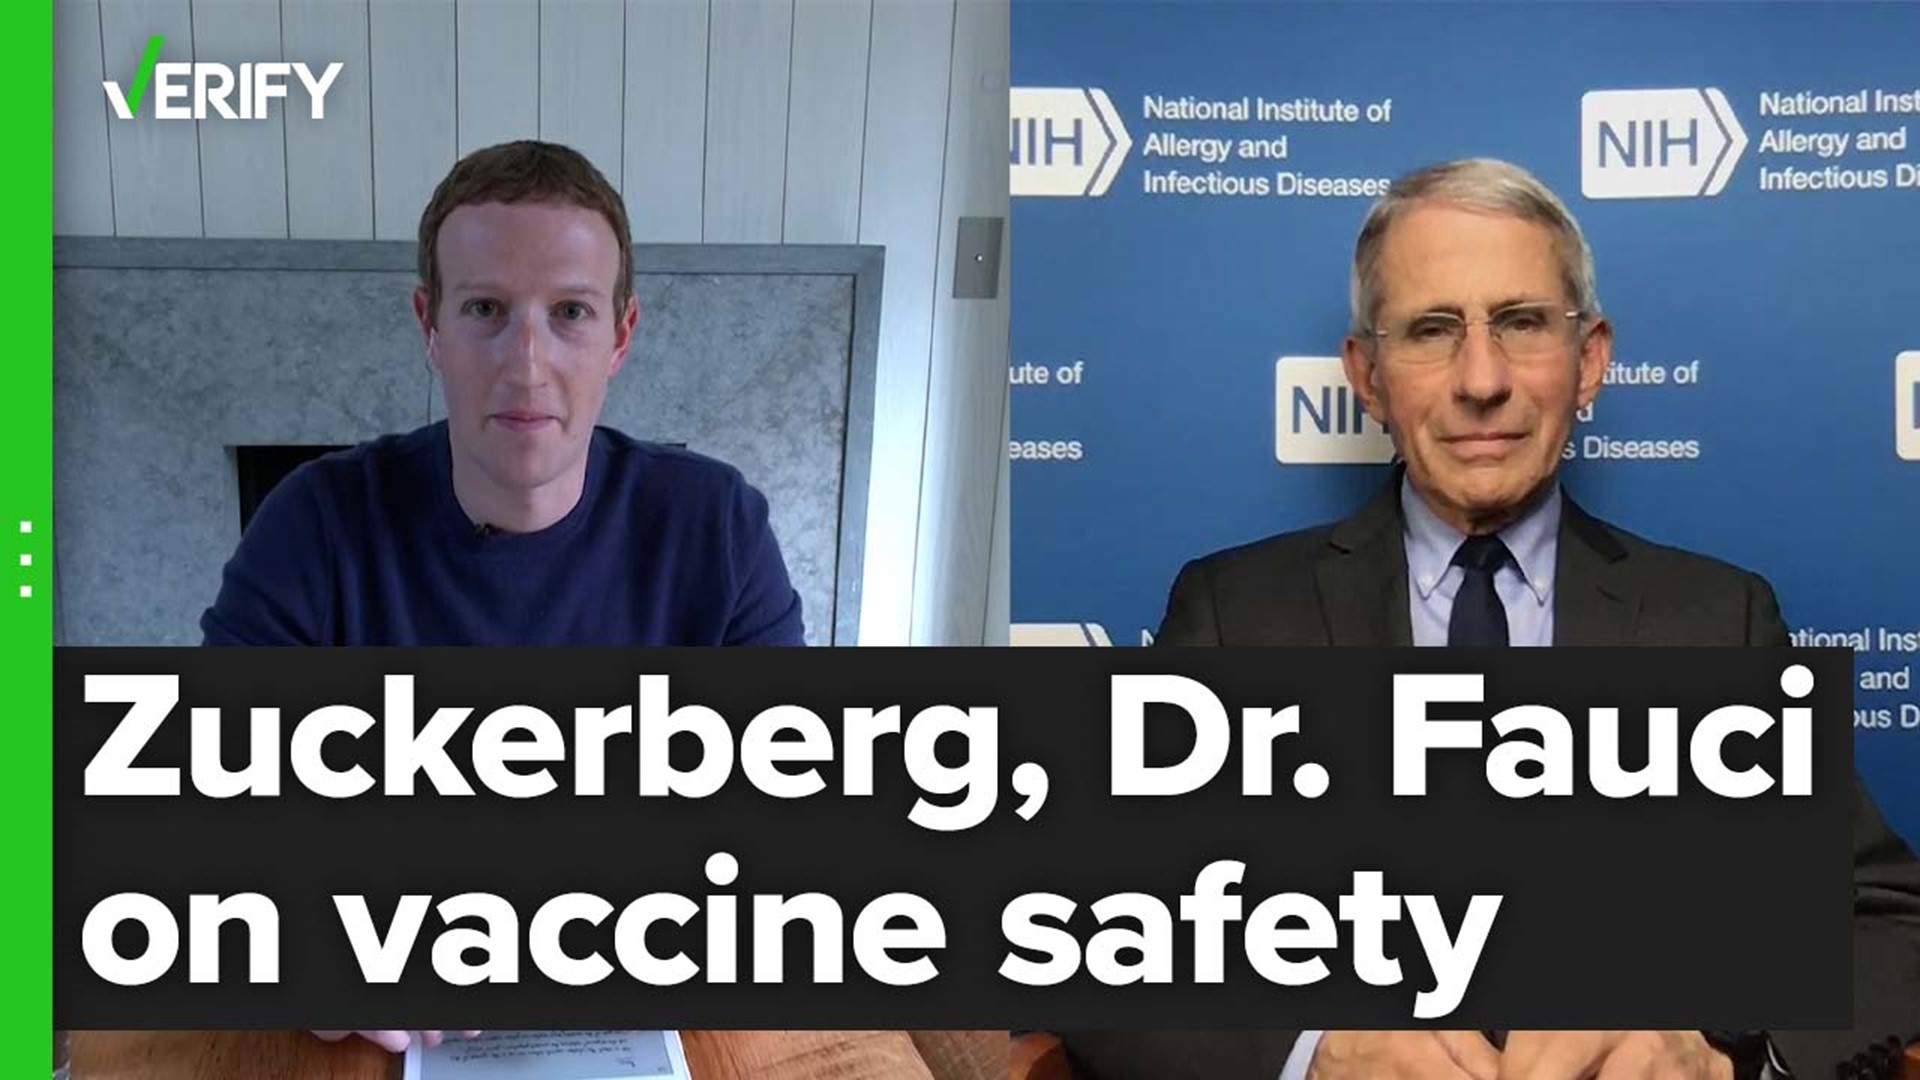 Dr. Fauci did not tell Mark Zuckerberg the COVID-19 vaccine would make people worse.